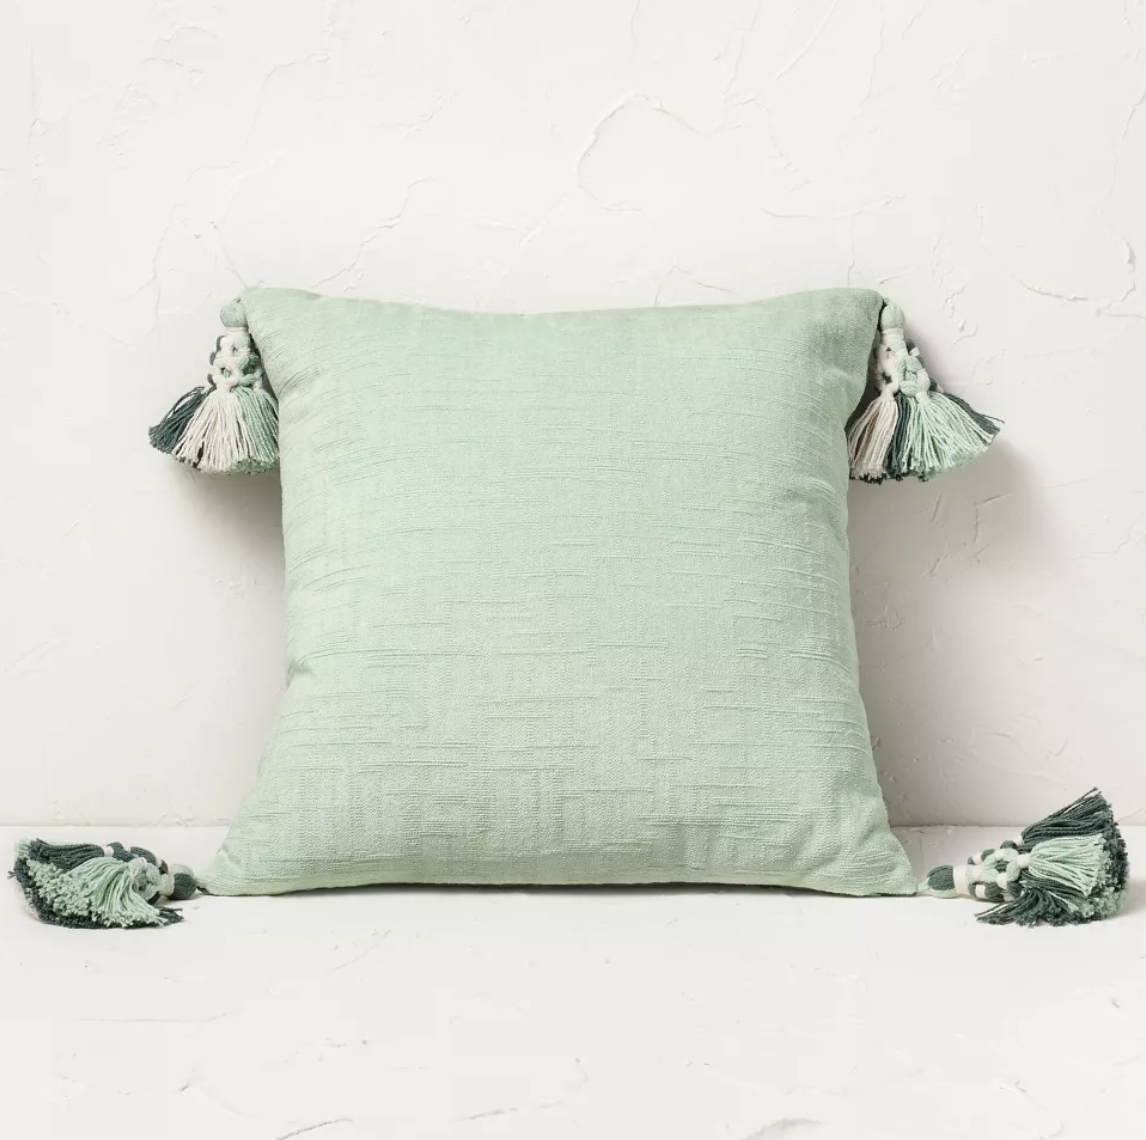 Target - $25 - Cotton Chenille Square Throw Pillow